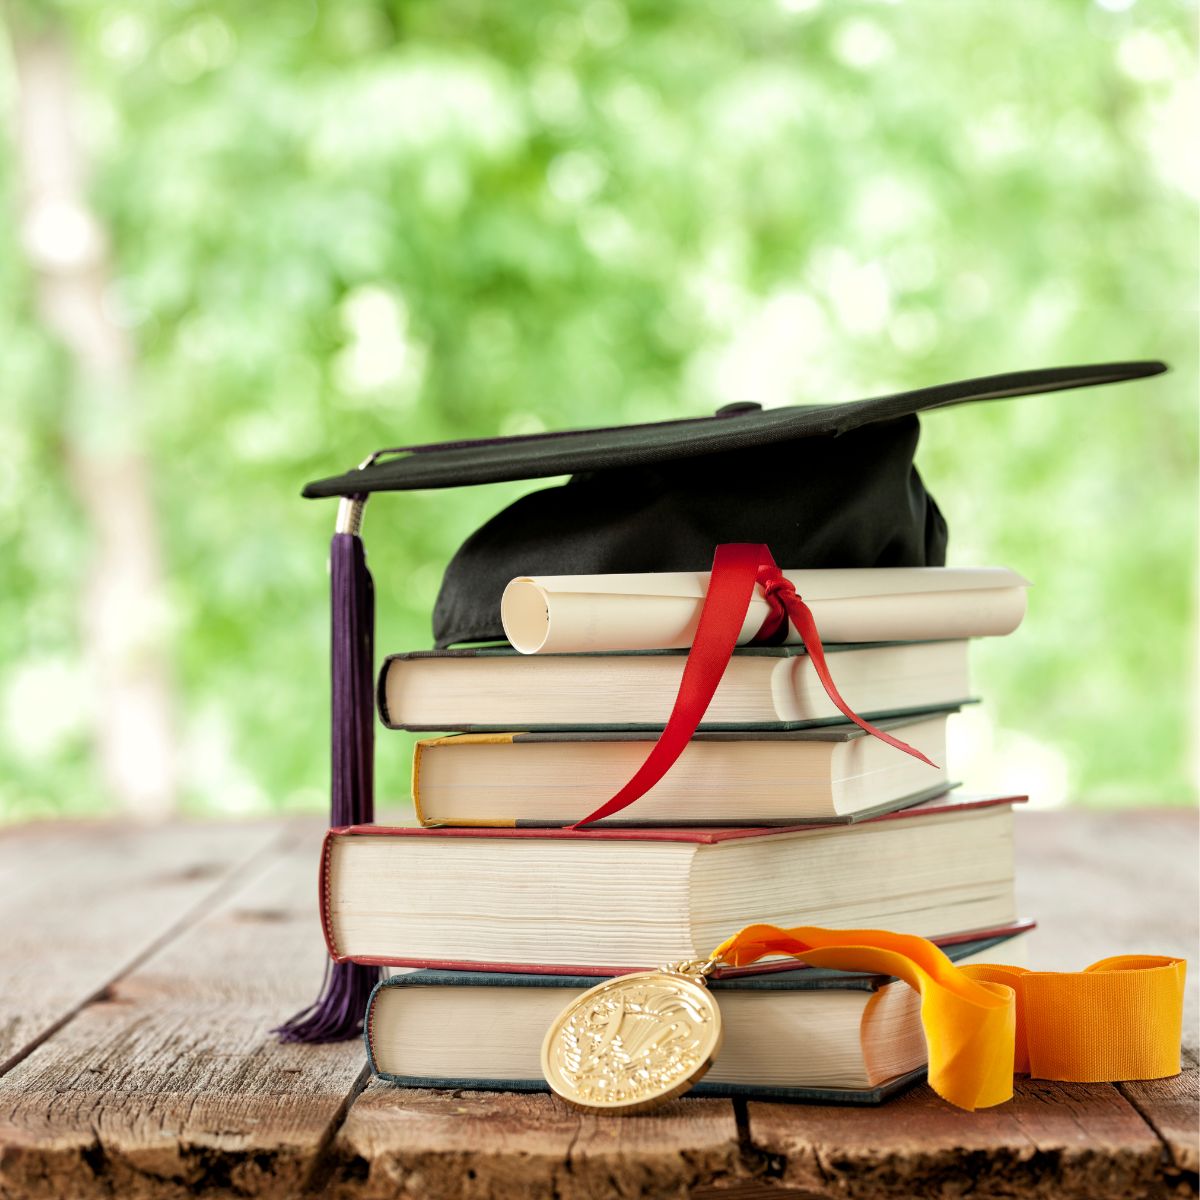 The Best Frugal and Practical Graduation Gift Ideas